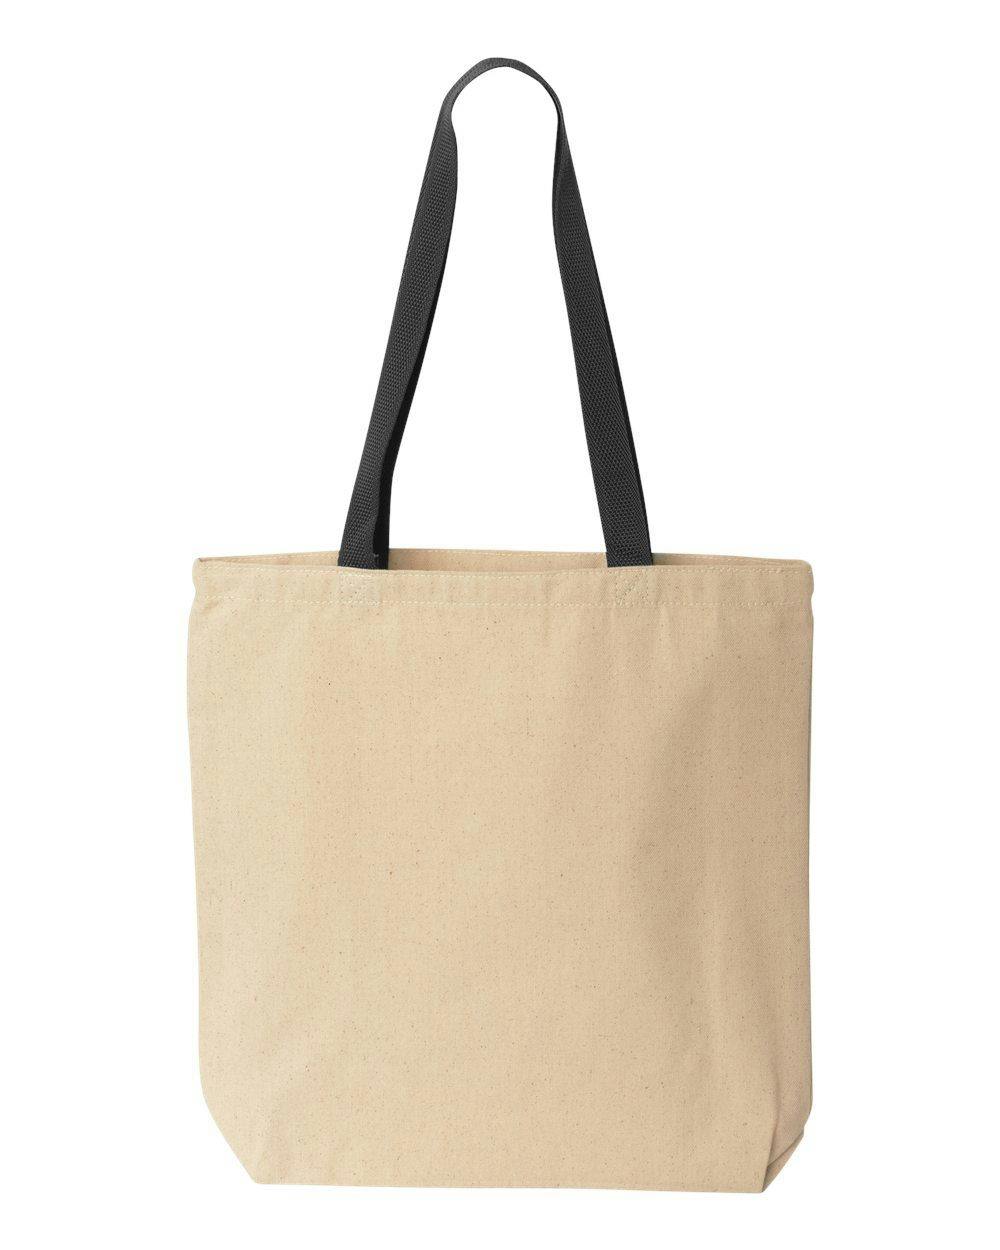 Image for Natural Tote with Contrast-Color Handles - 8868